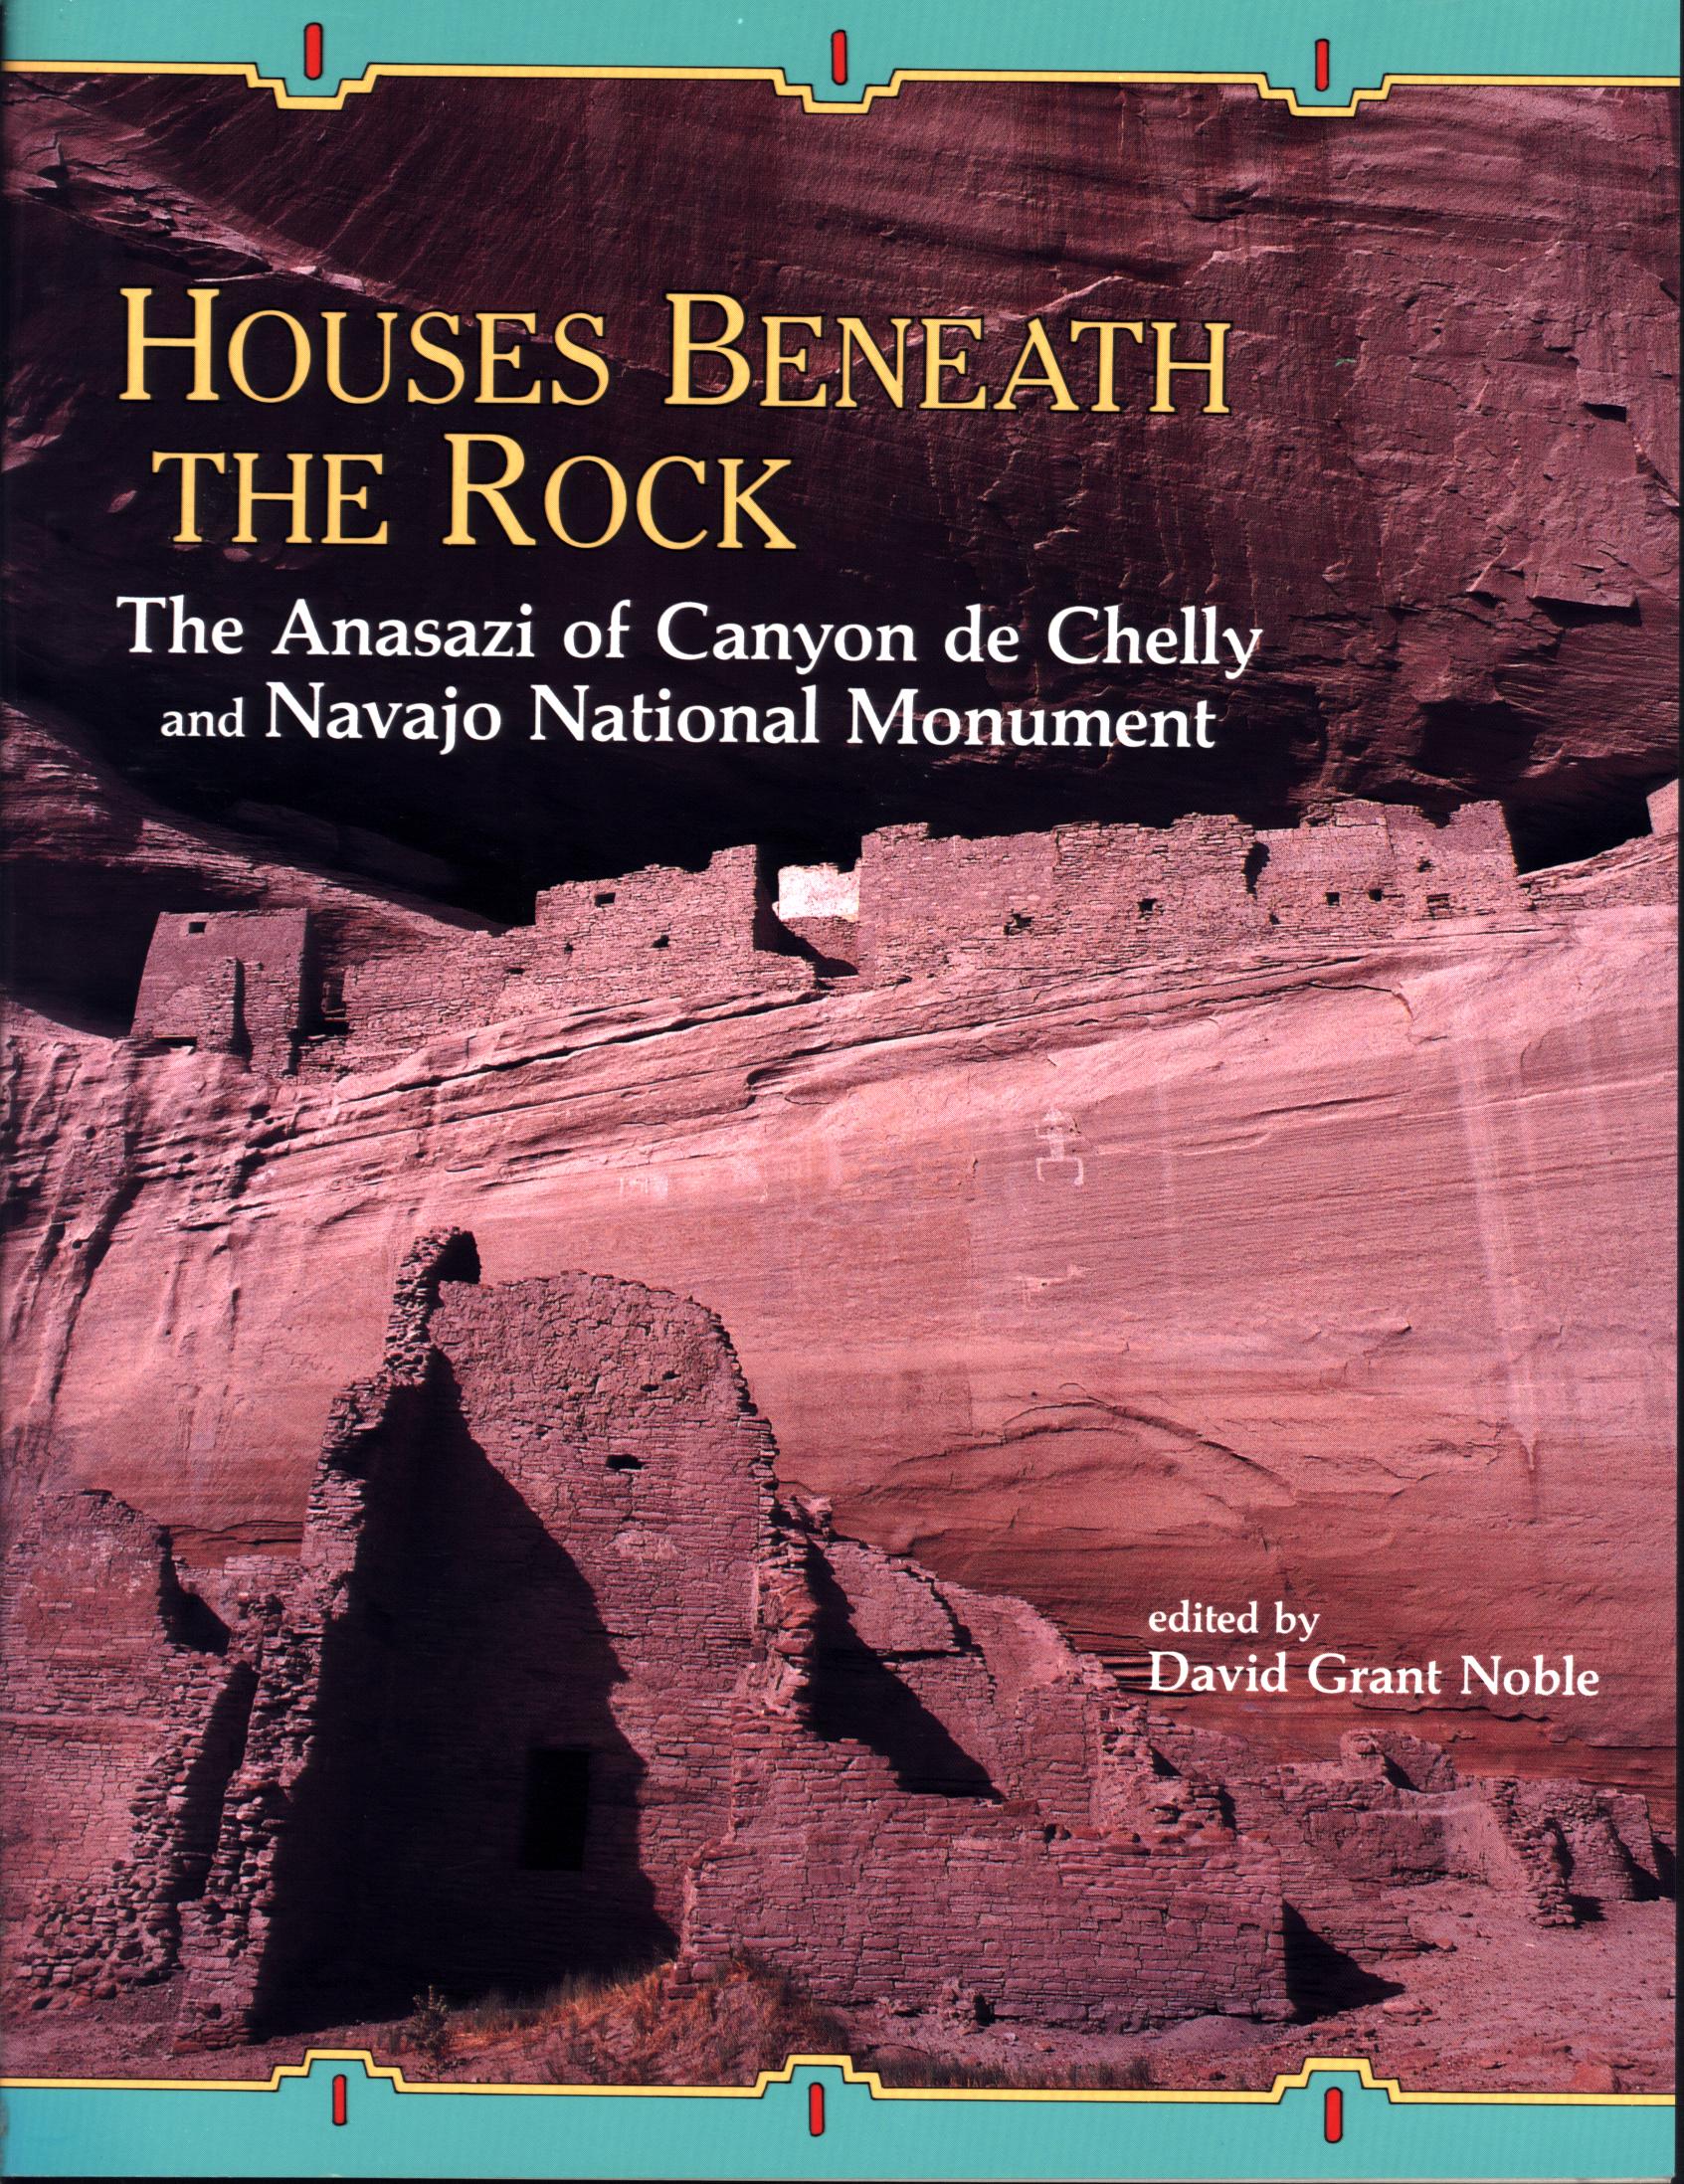 HOUSES BENEATH THE ROCK: the Anasazi of Canyon de Chelly and Navajo National Monumen